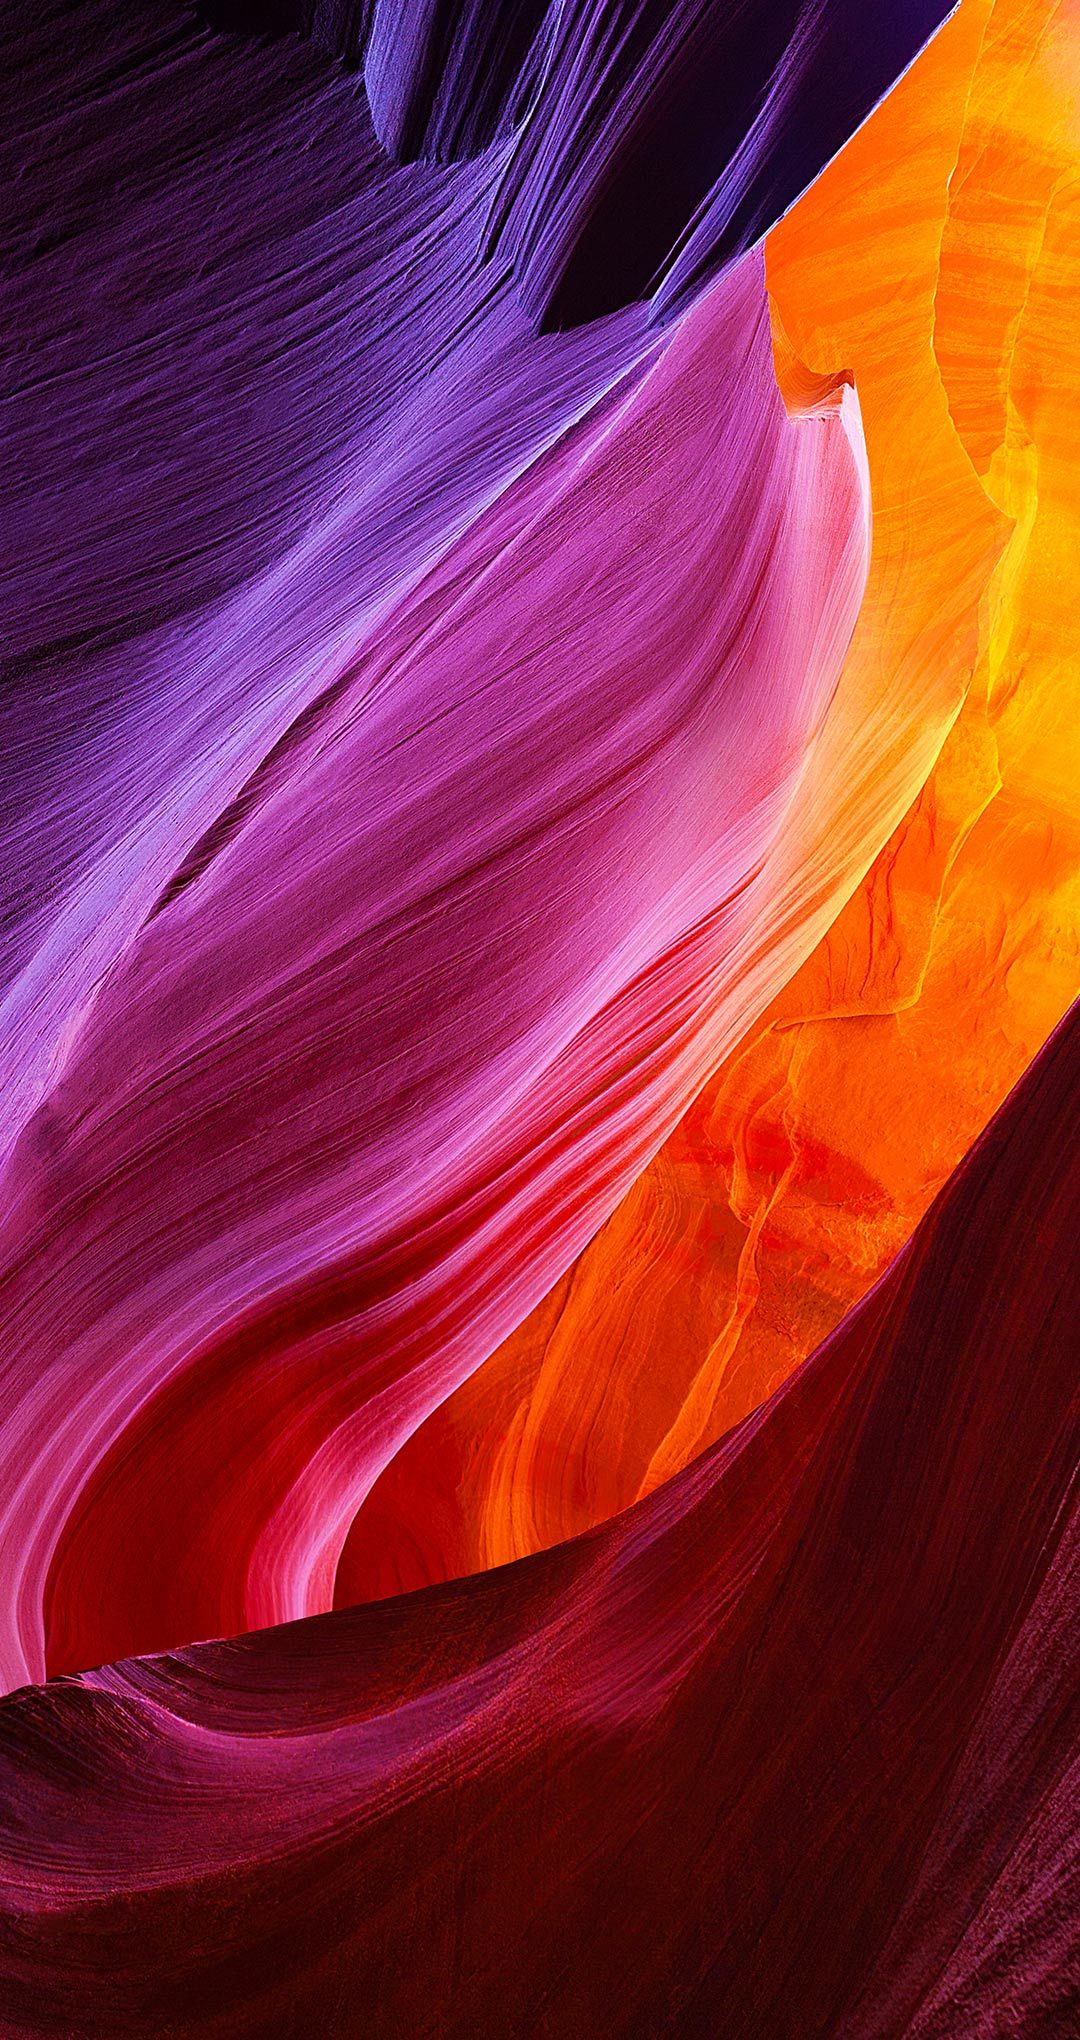 Get Xiaomi Mix Stock Wallpaper From Here